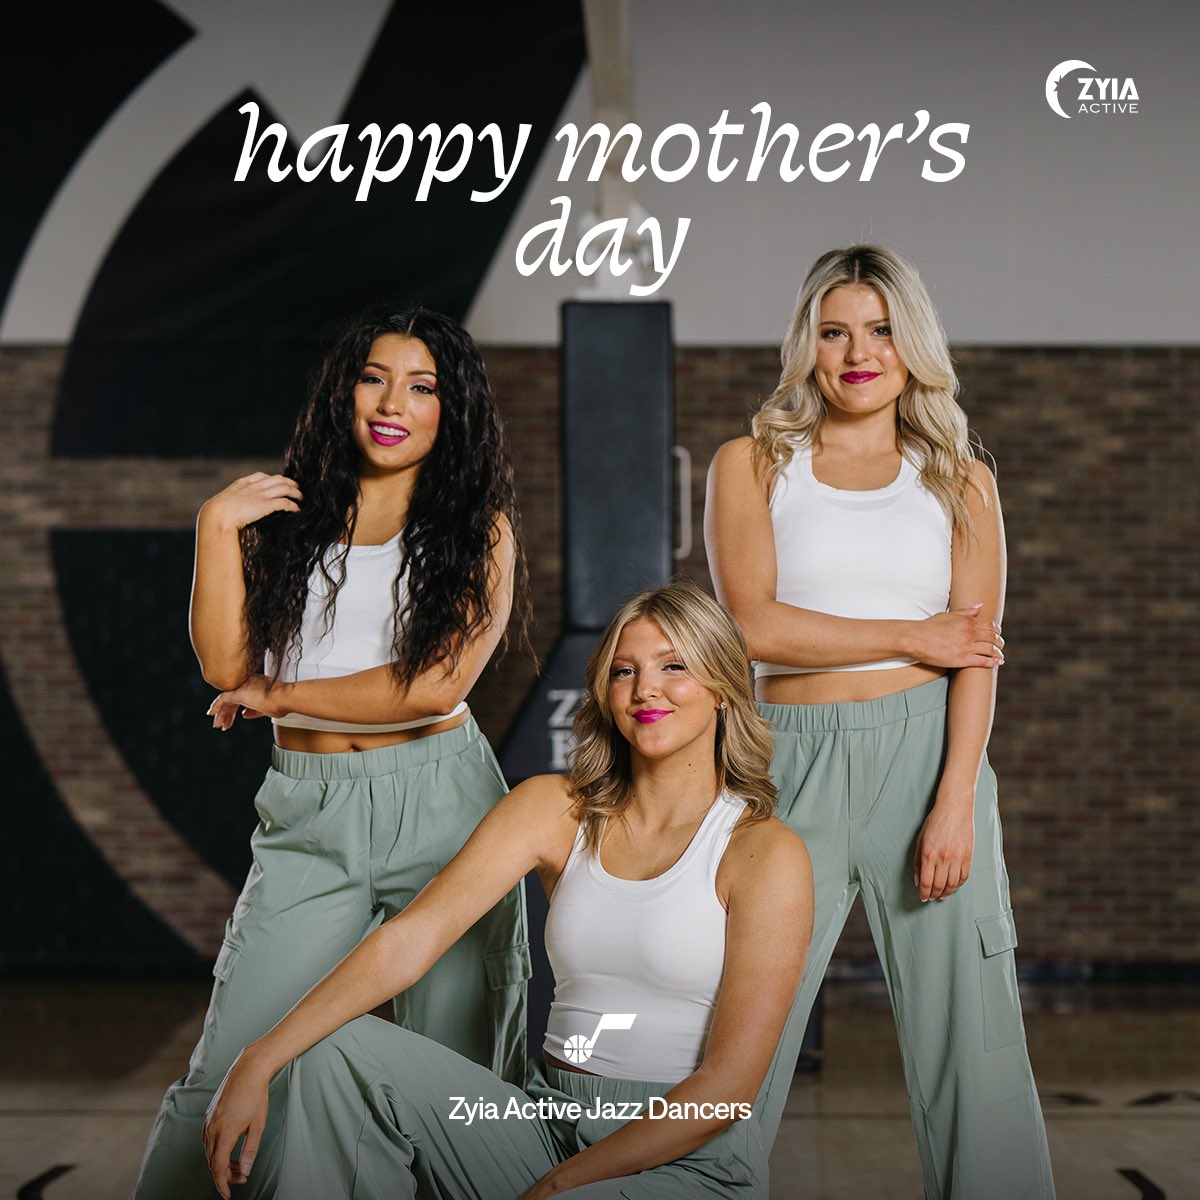 Wishing all the incredible moms out there a Happy Mother’s Day from the @UtahJazzDancers 💜 It’s not too late to surprise mom with some flowers 💐 #TakeNote | @ZyiaActive